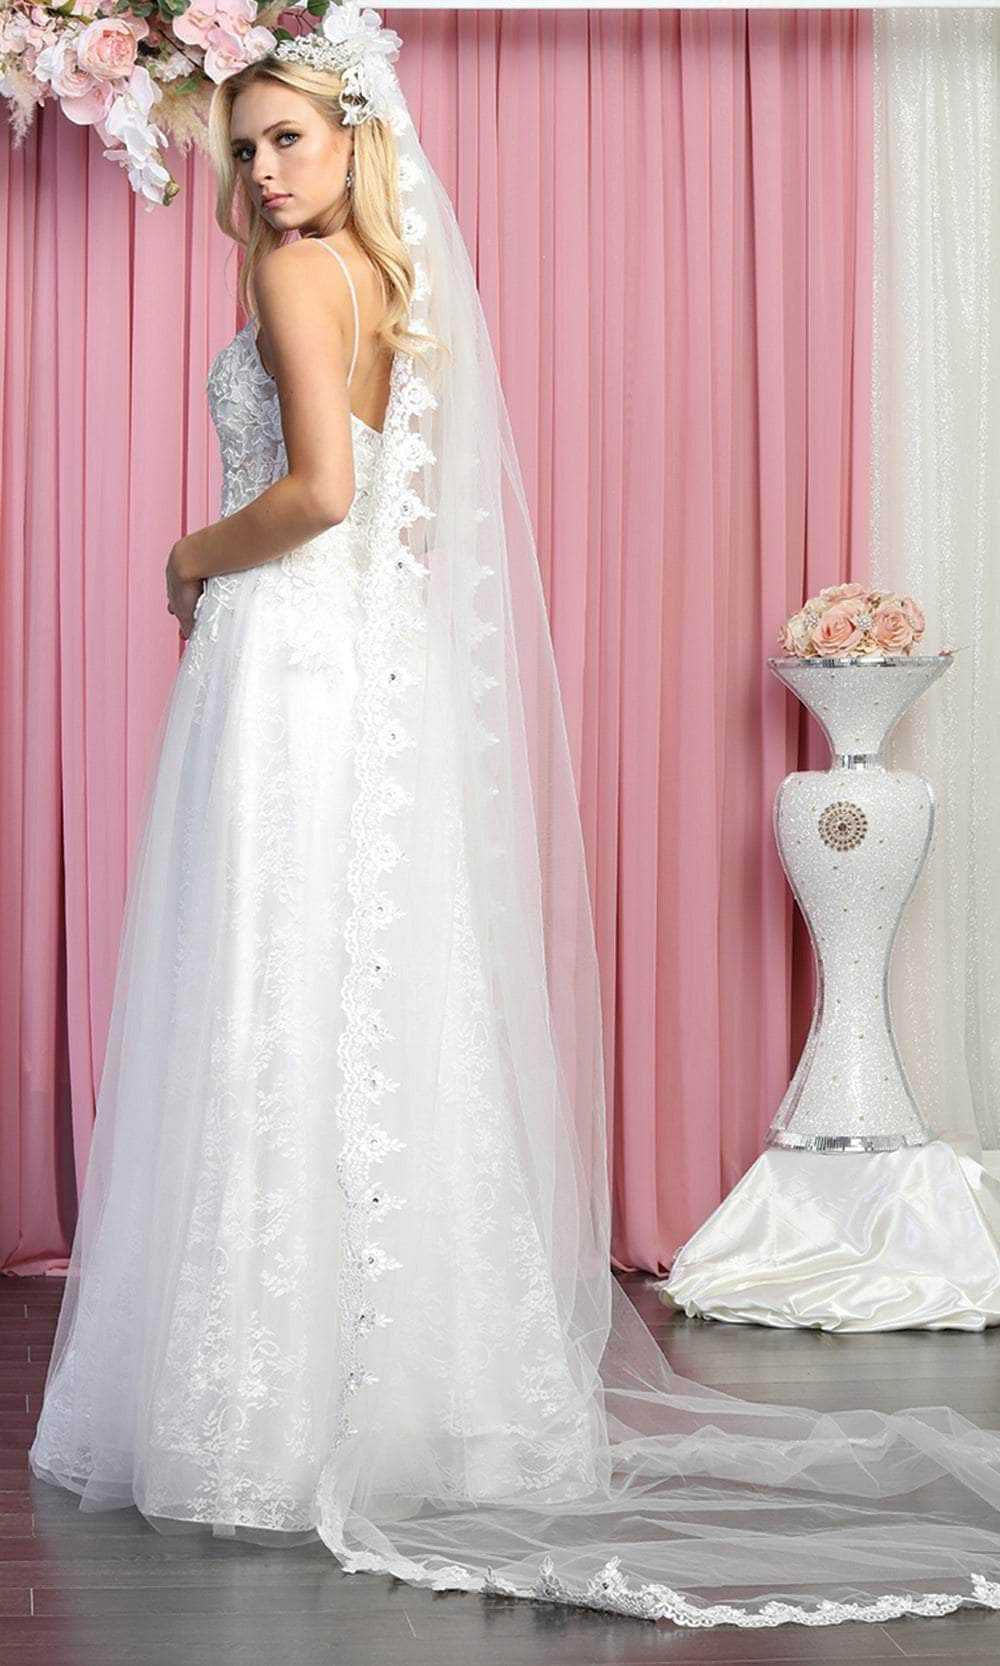 May Queen, May Queen RQ7915 - Sleeveless Deep V-neck Bridal Gown